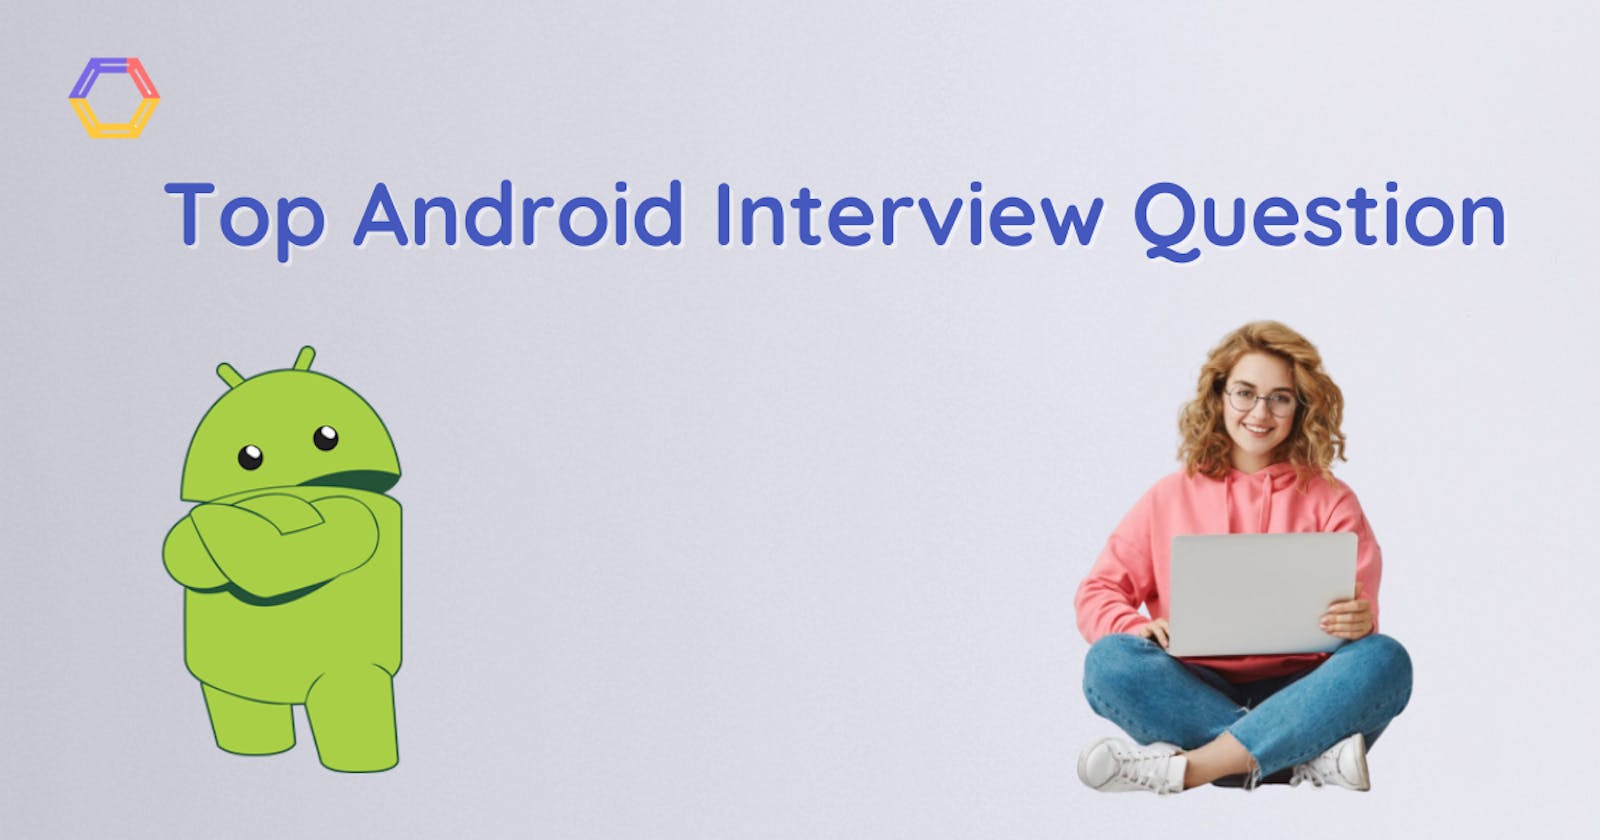 Top Android Interview Questions